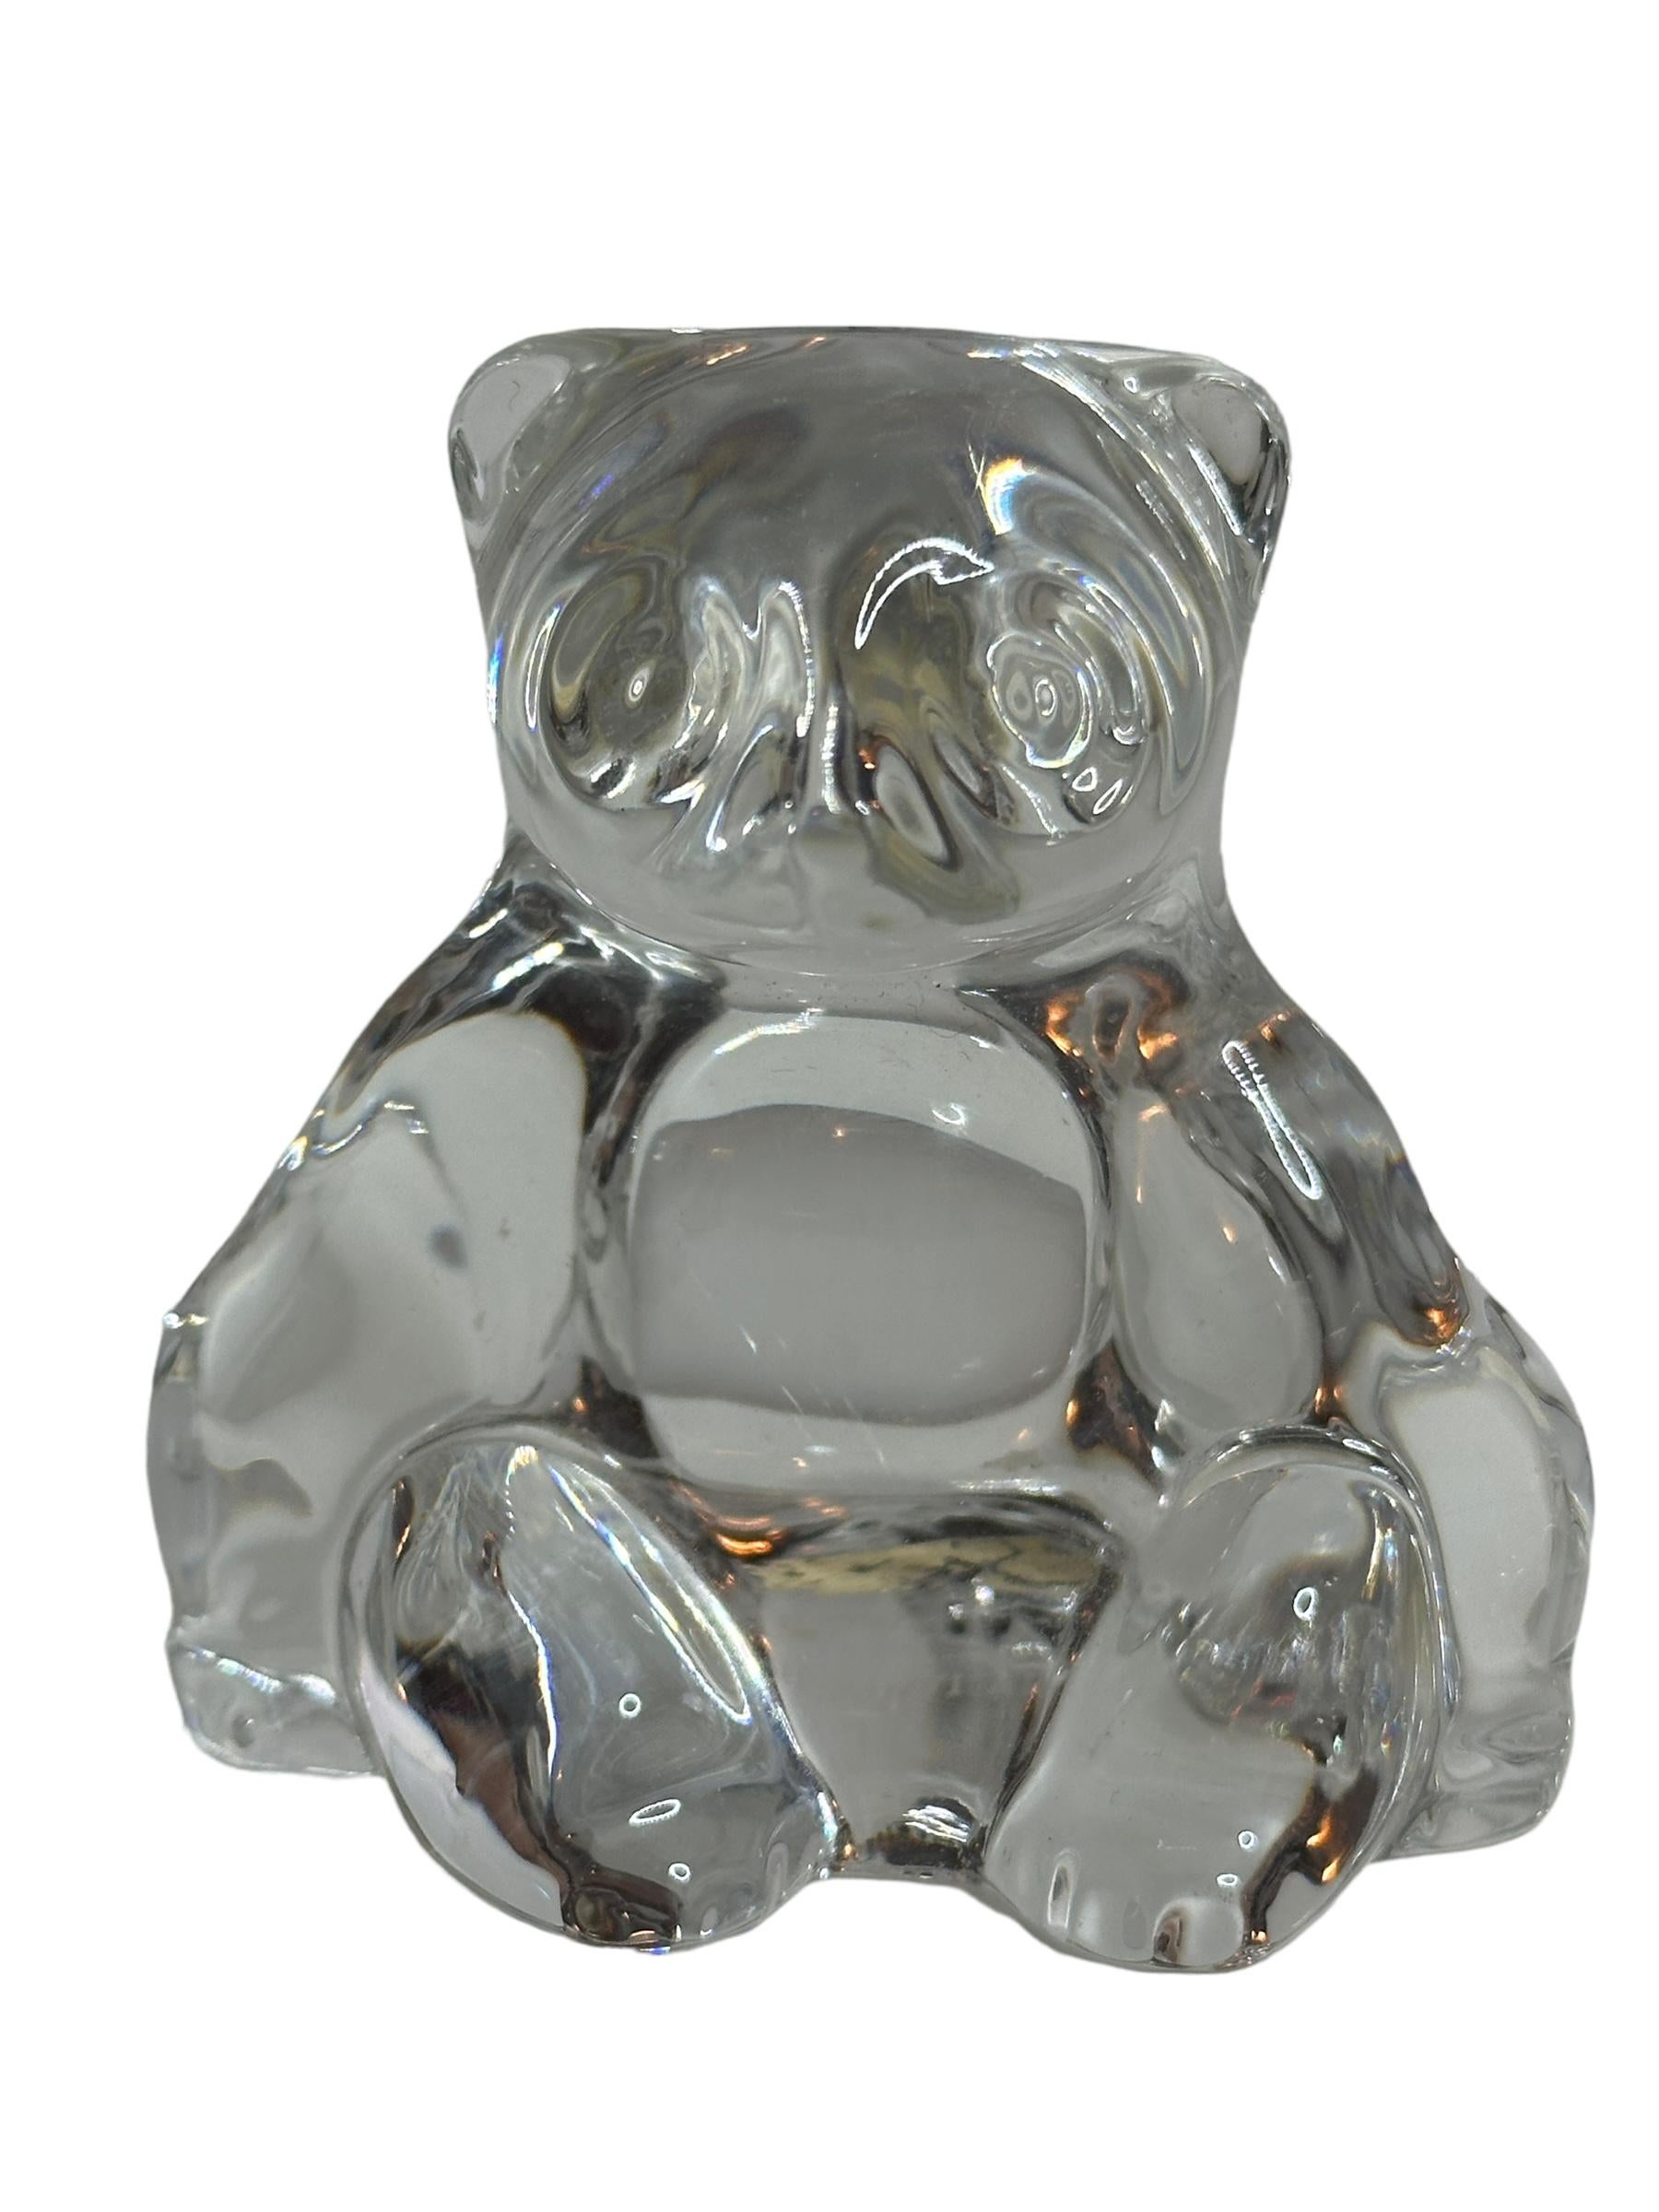 This vintage Villeroy & Boch paperweight features a delightful sitting panda bear design. The clear glass material is cut-to-clear and gives the paperweight a charming cuddly appearance. This modern original is a perfect addition to any collection